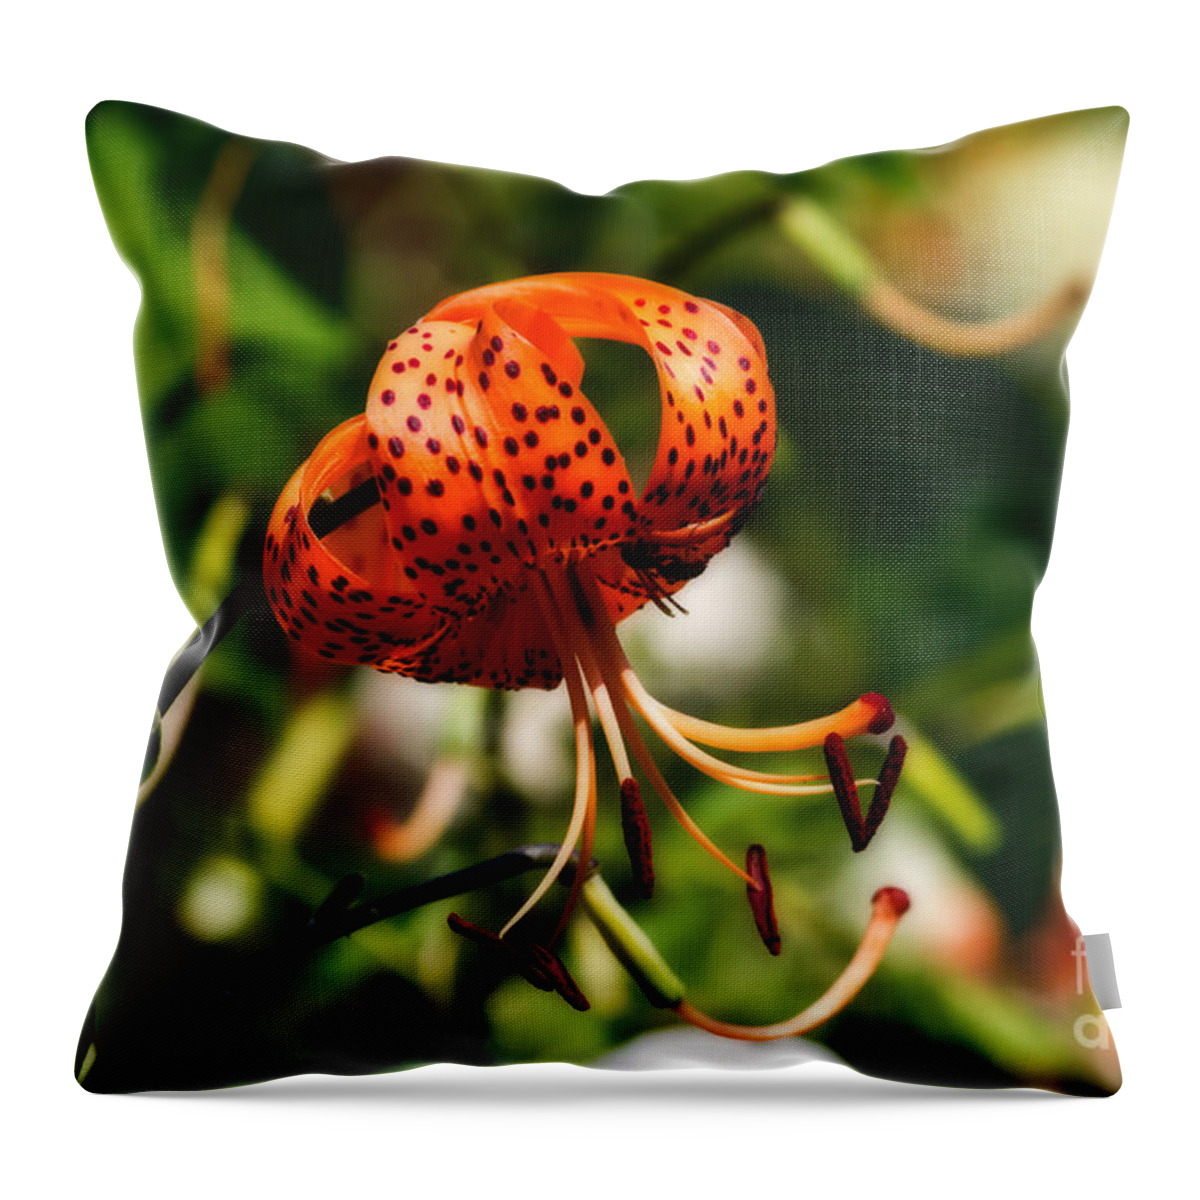 Flower Throw Pillow featuring the photograph Spotted Orange Lily by Ms Judi